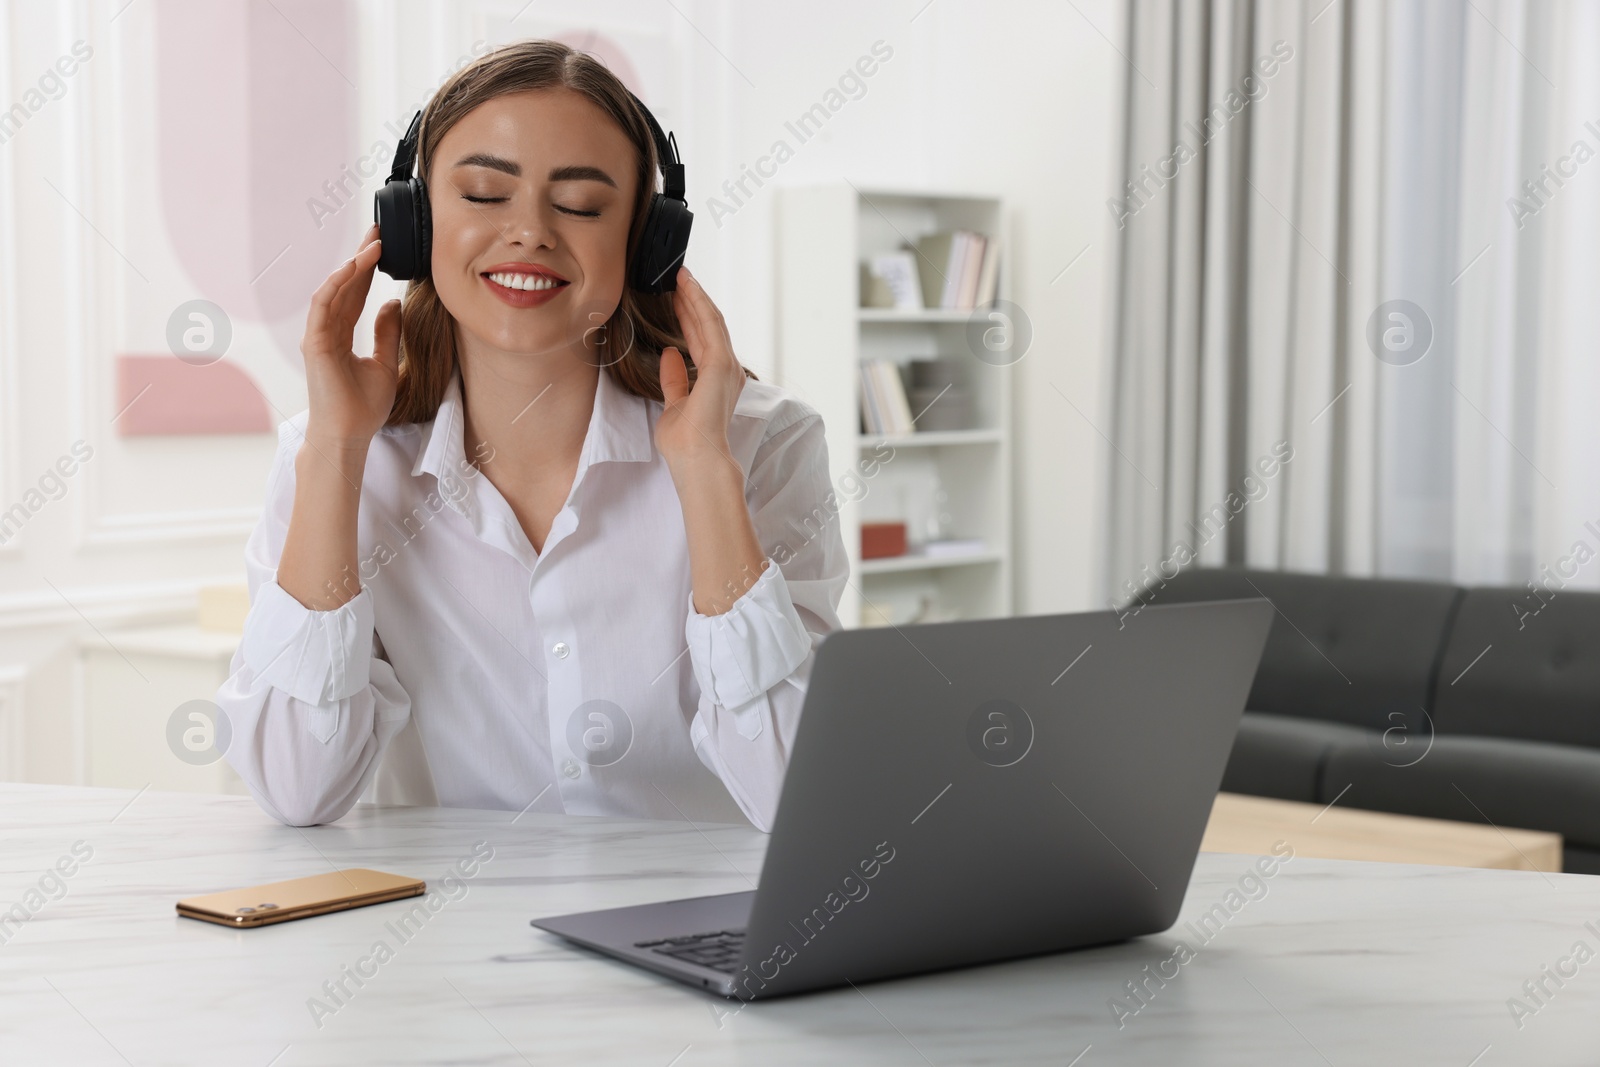 Photo of Happy woman with headphones listening to music near laptop at white table in room